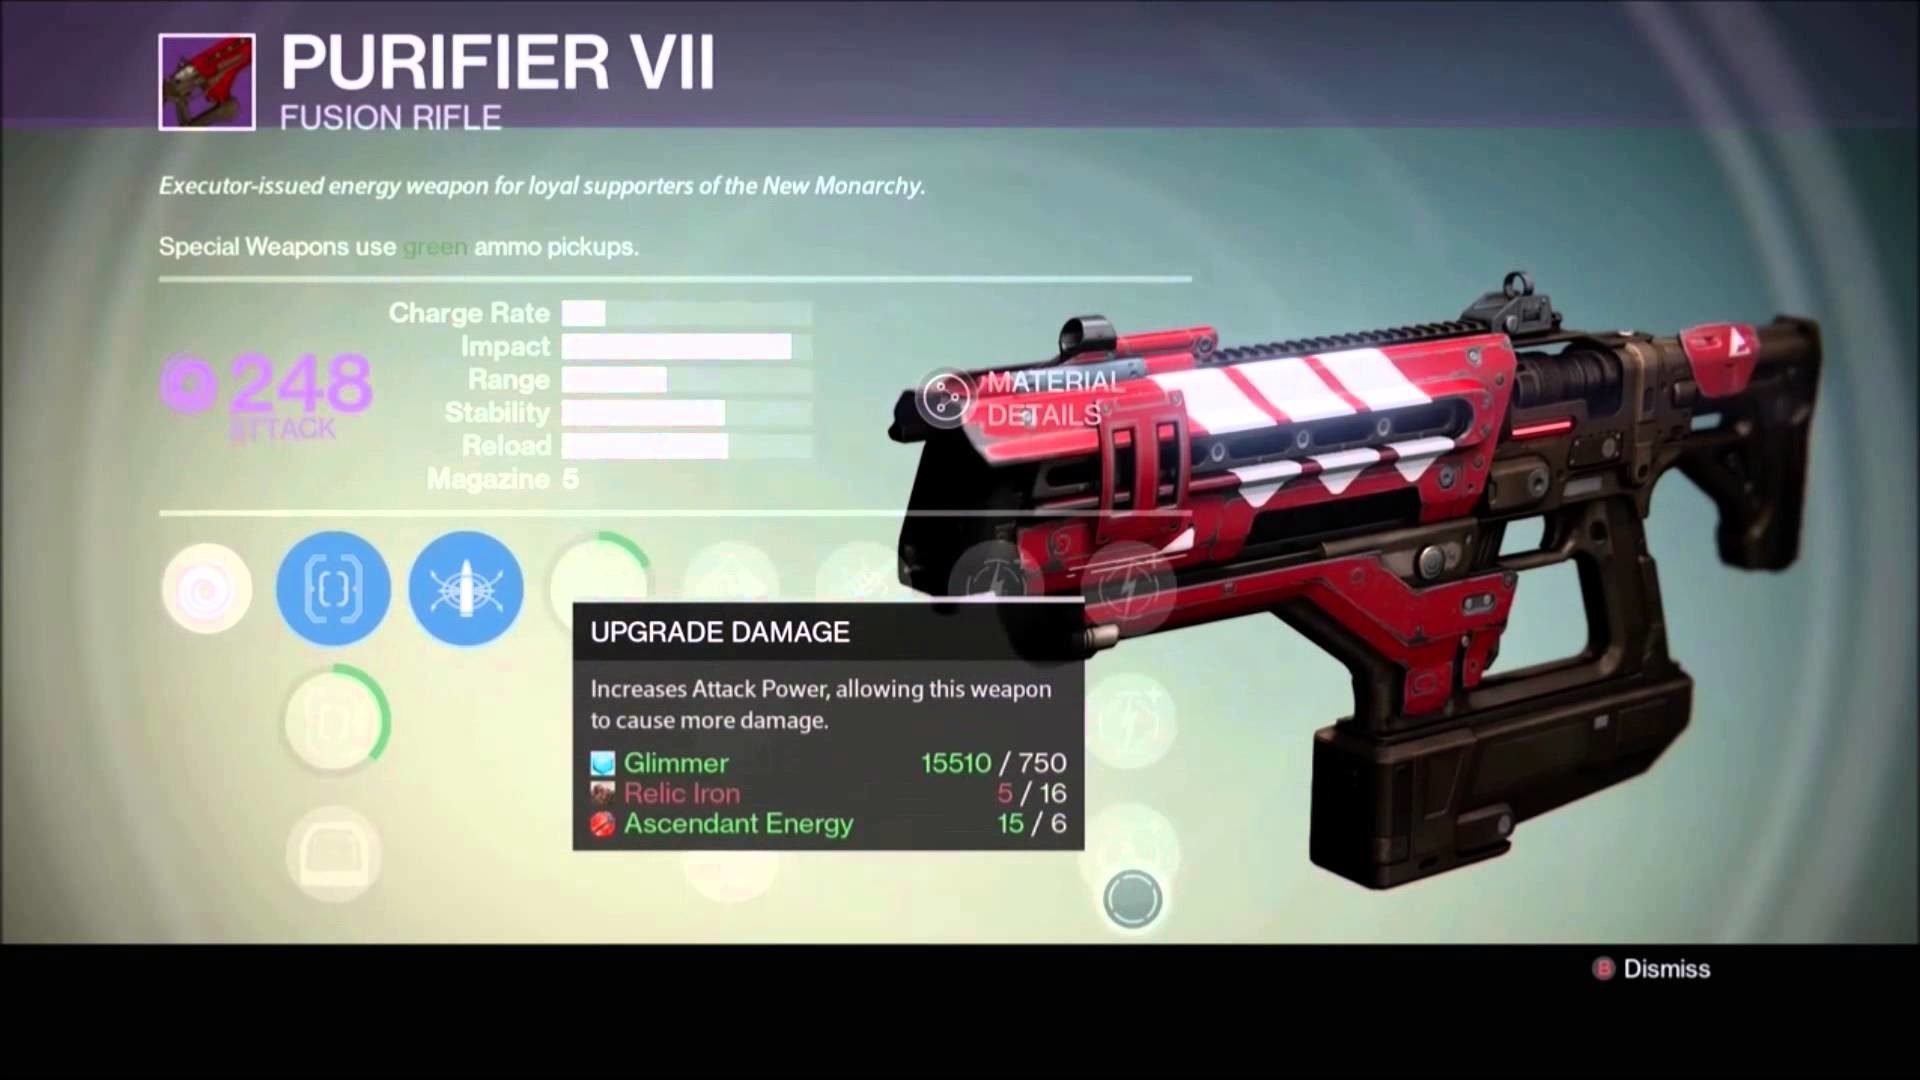 1920x1080 New Monarchy Purifier VII Fusion Rifle Review